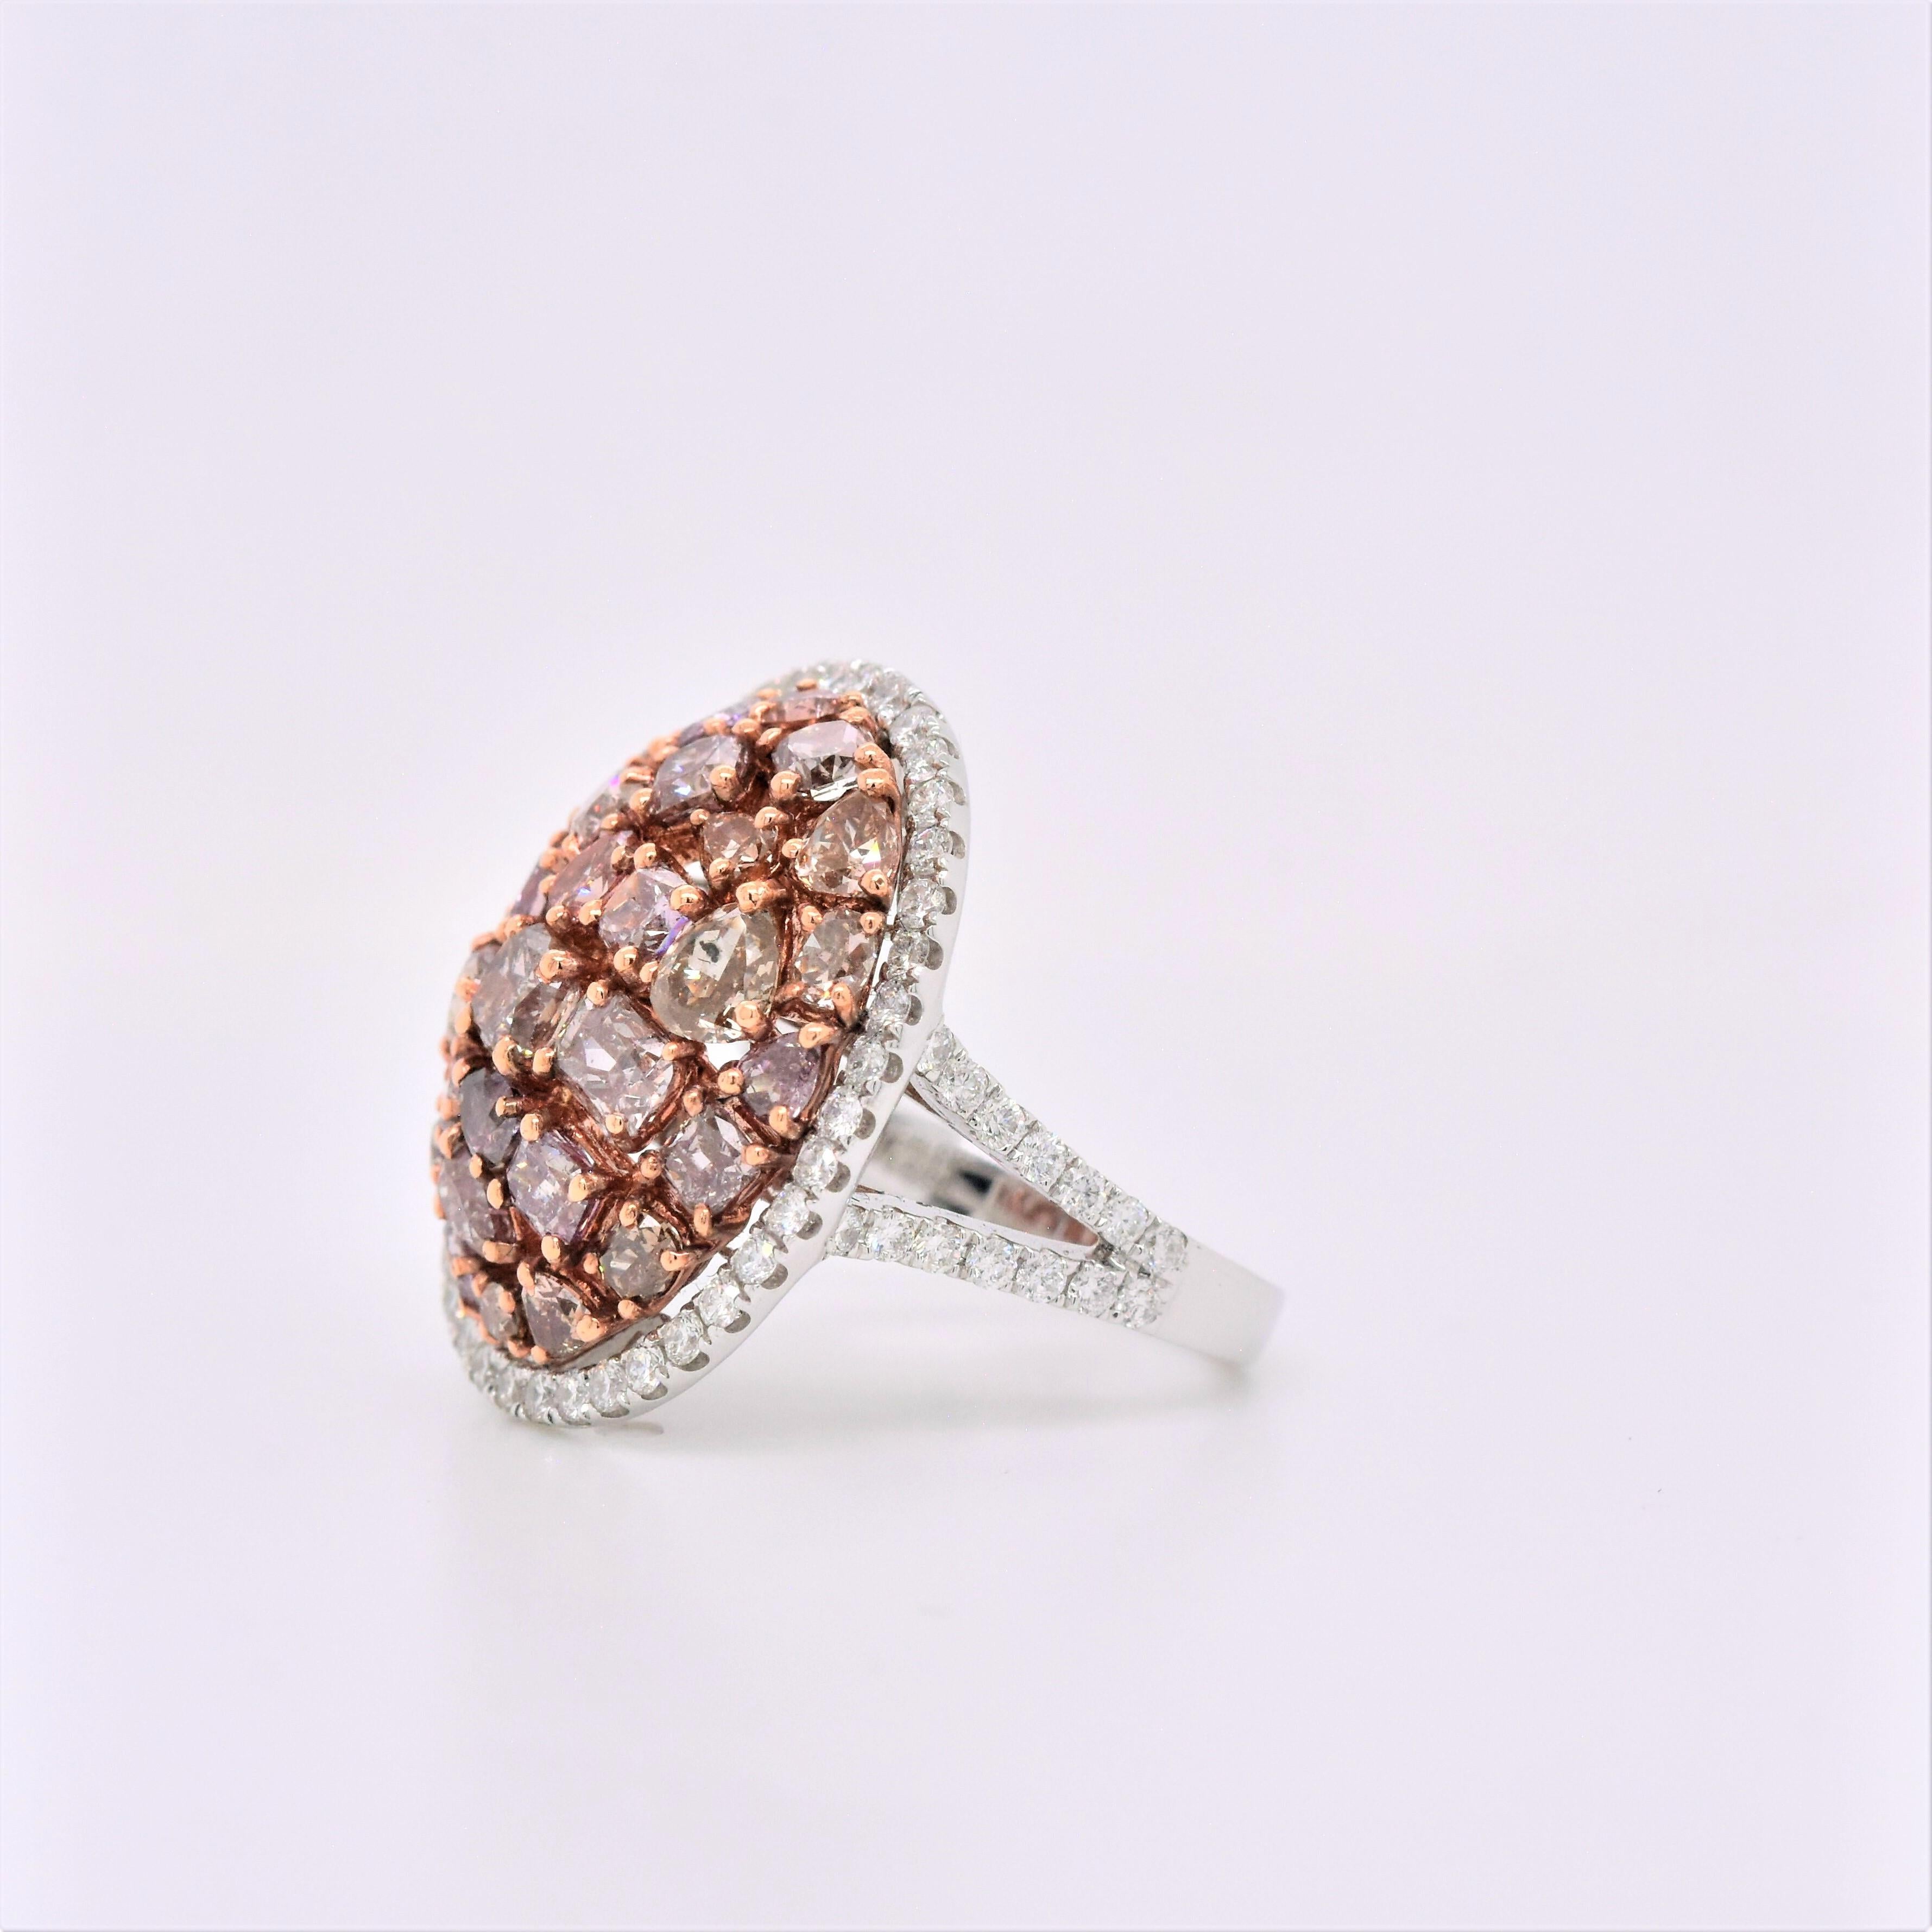 Stylish 4.84 Carat Natural Pink Mixed Cut Diamond Cluster Ring with a Halo of White Diamonds.
Total Carat Weight: 4.84 Carats
Mixed Cut Natural Fancy Pink Diamonds: 3.93 Carats (total 30 stones)
Round White Diamonds: 0.91 Carats (total 68